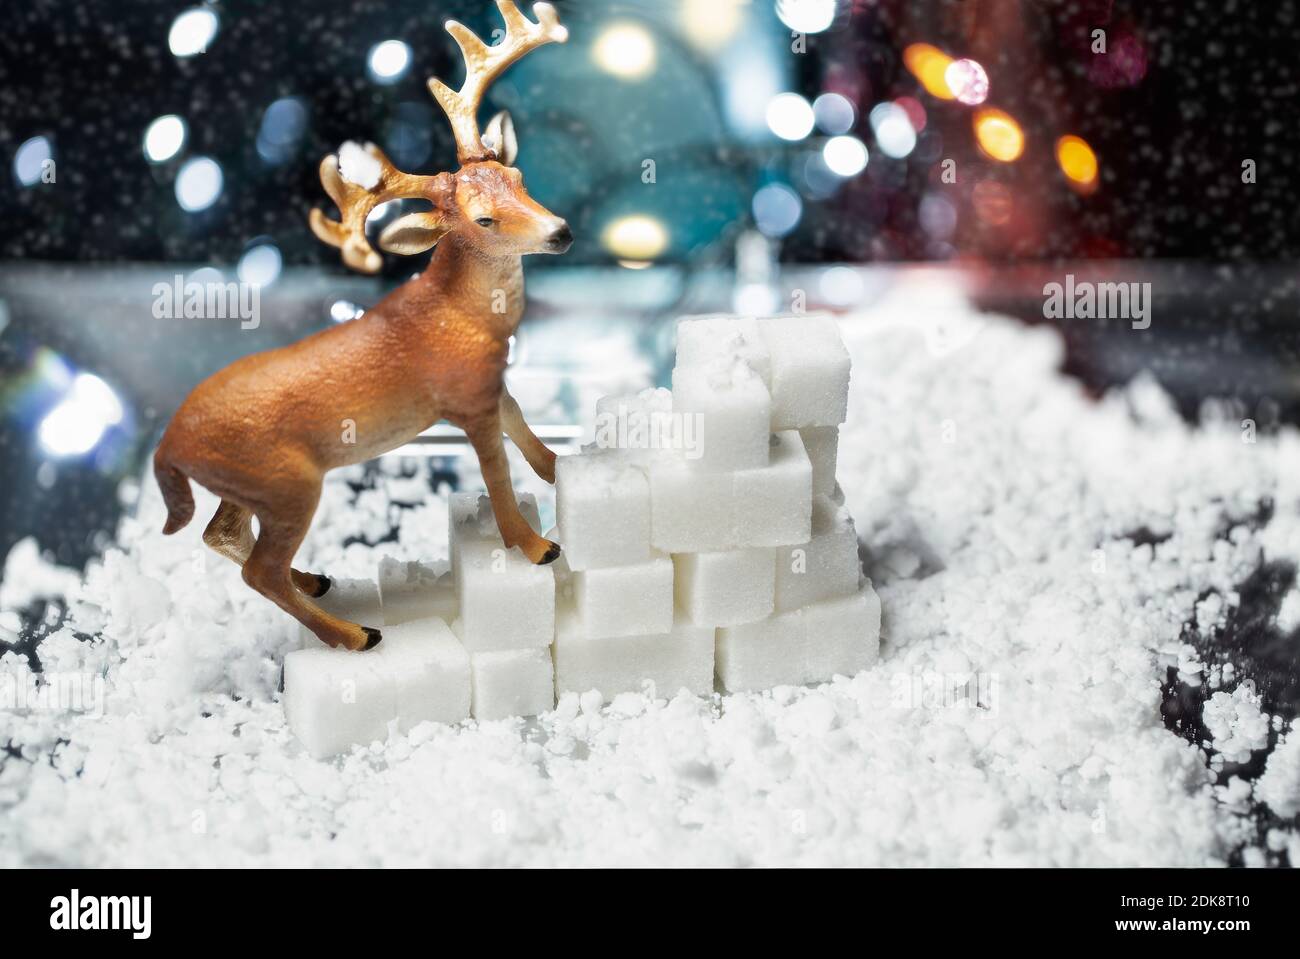 Scene of decorative reindeer over artificial snow and sugar cubes with a bokeh Christmas lights background Stock Photo